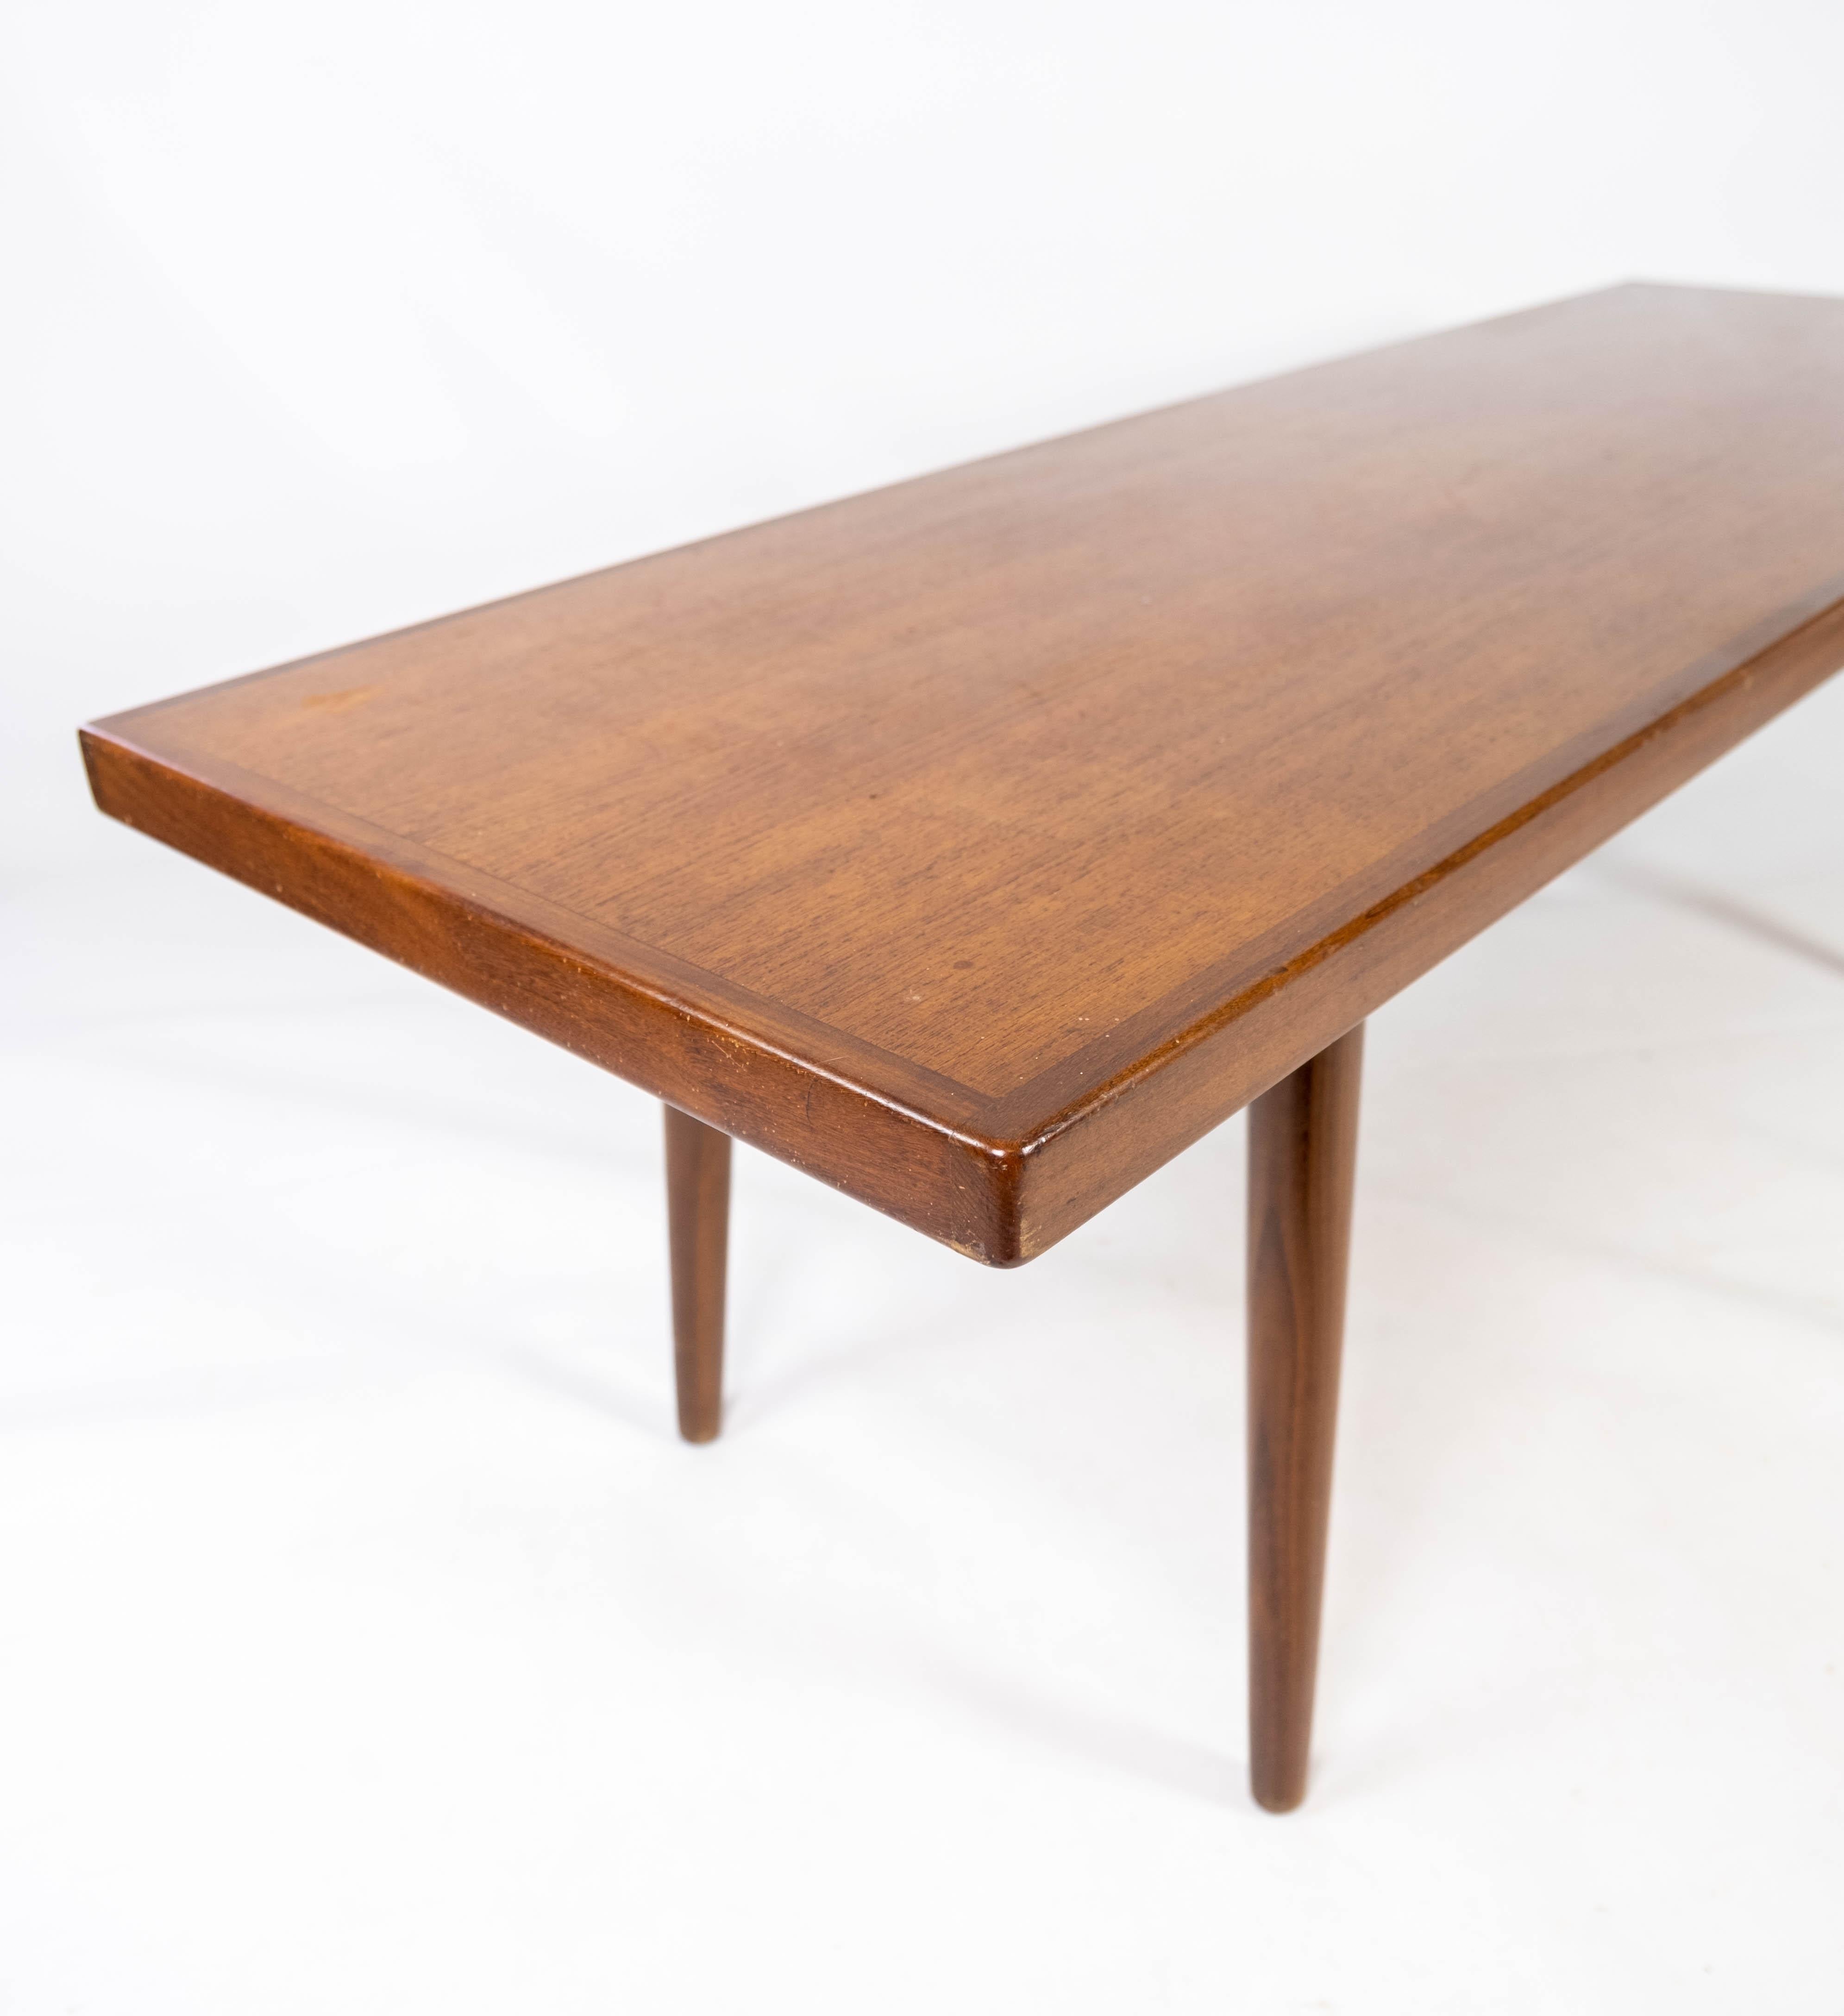 Coffee Table Made In Teak, Danish Design From 1960s For Sale 6